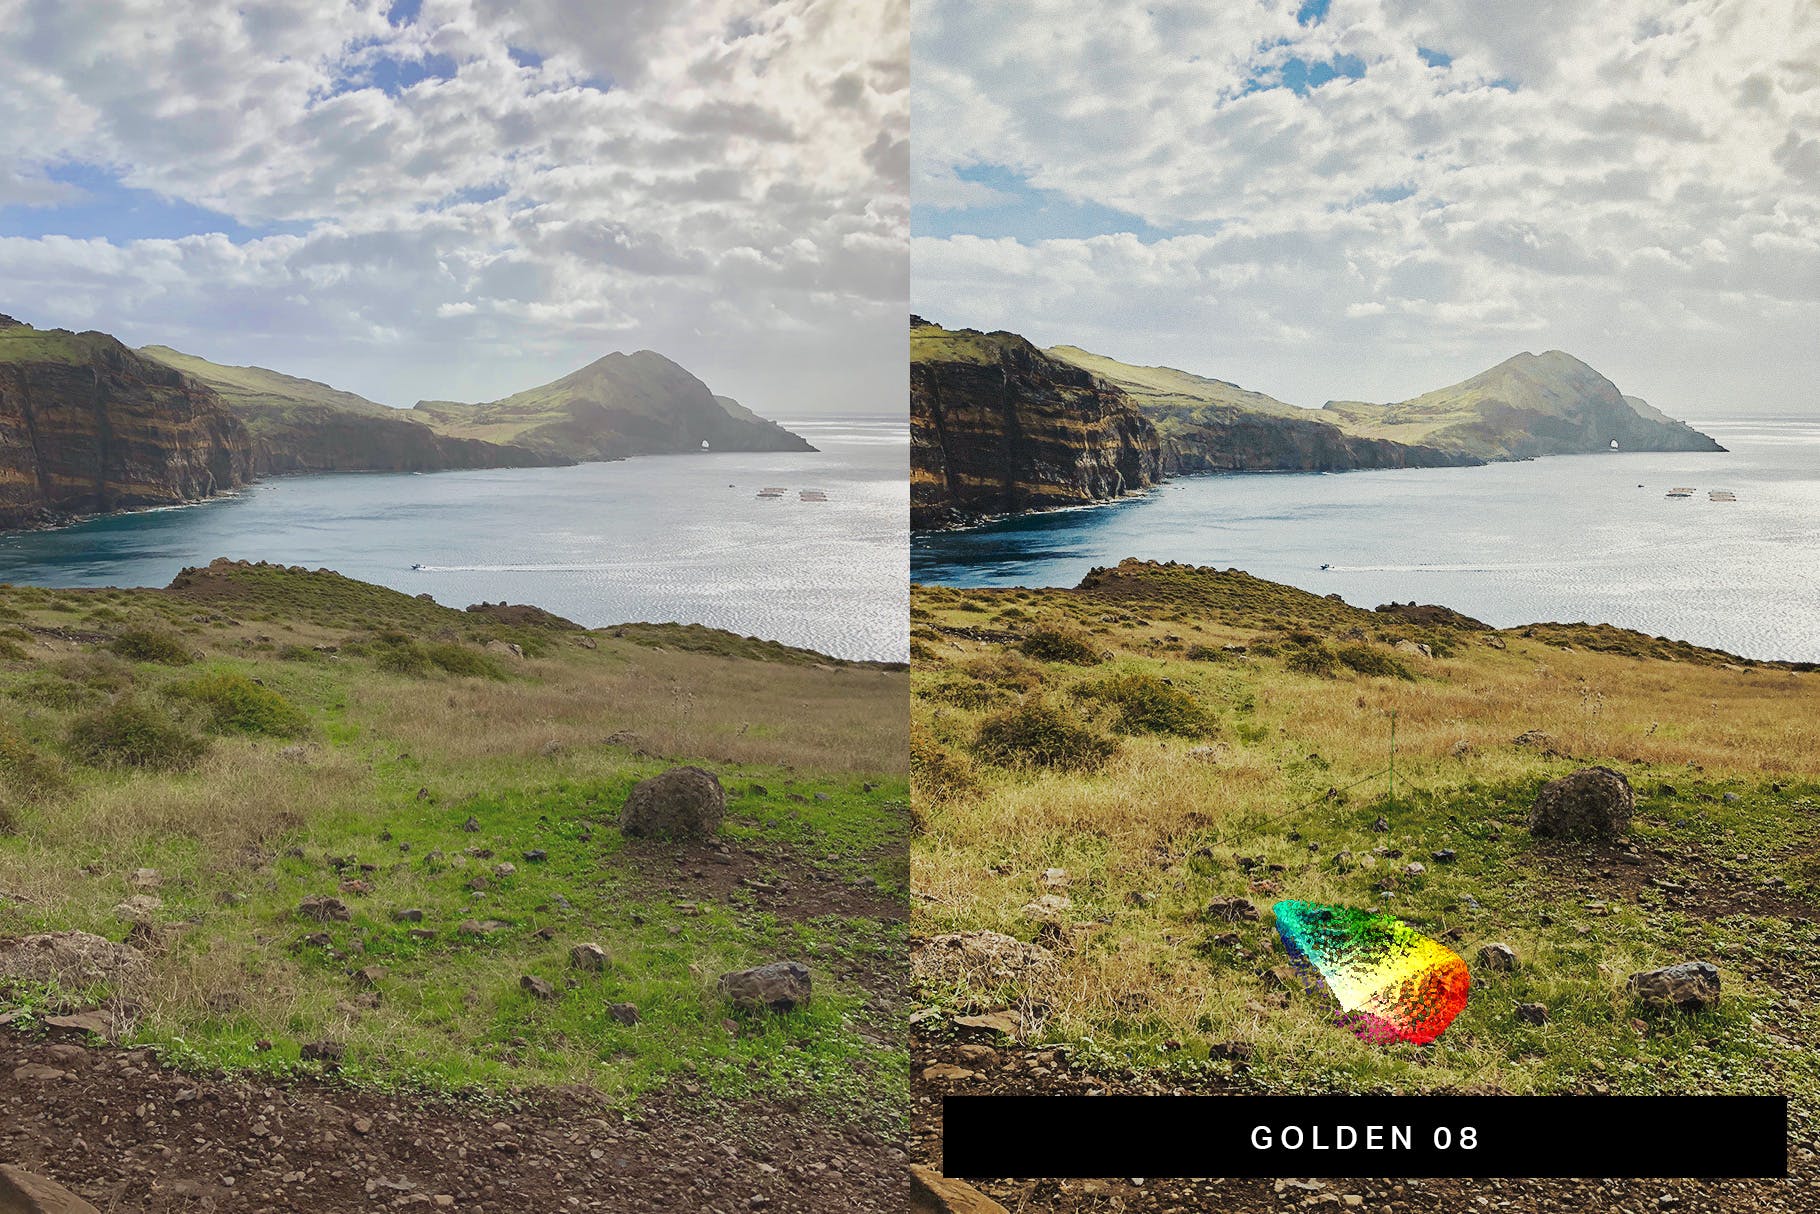 Luts调色预设-50个徒步旅行灯塔预设lut50 Hiking Lightroom Presets and LUTs插图9